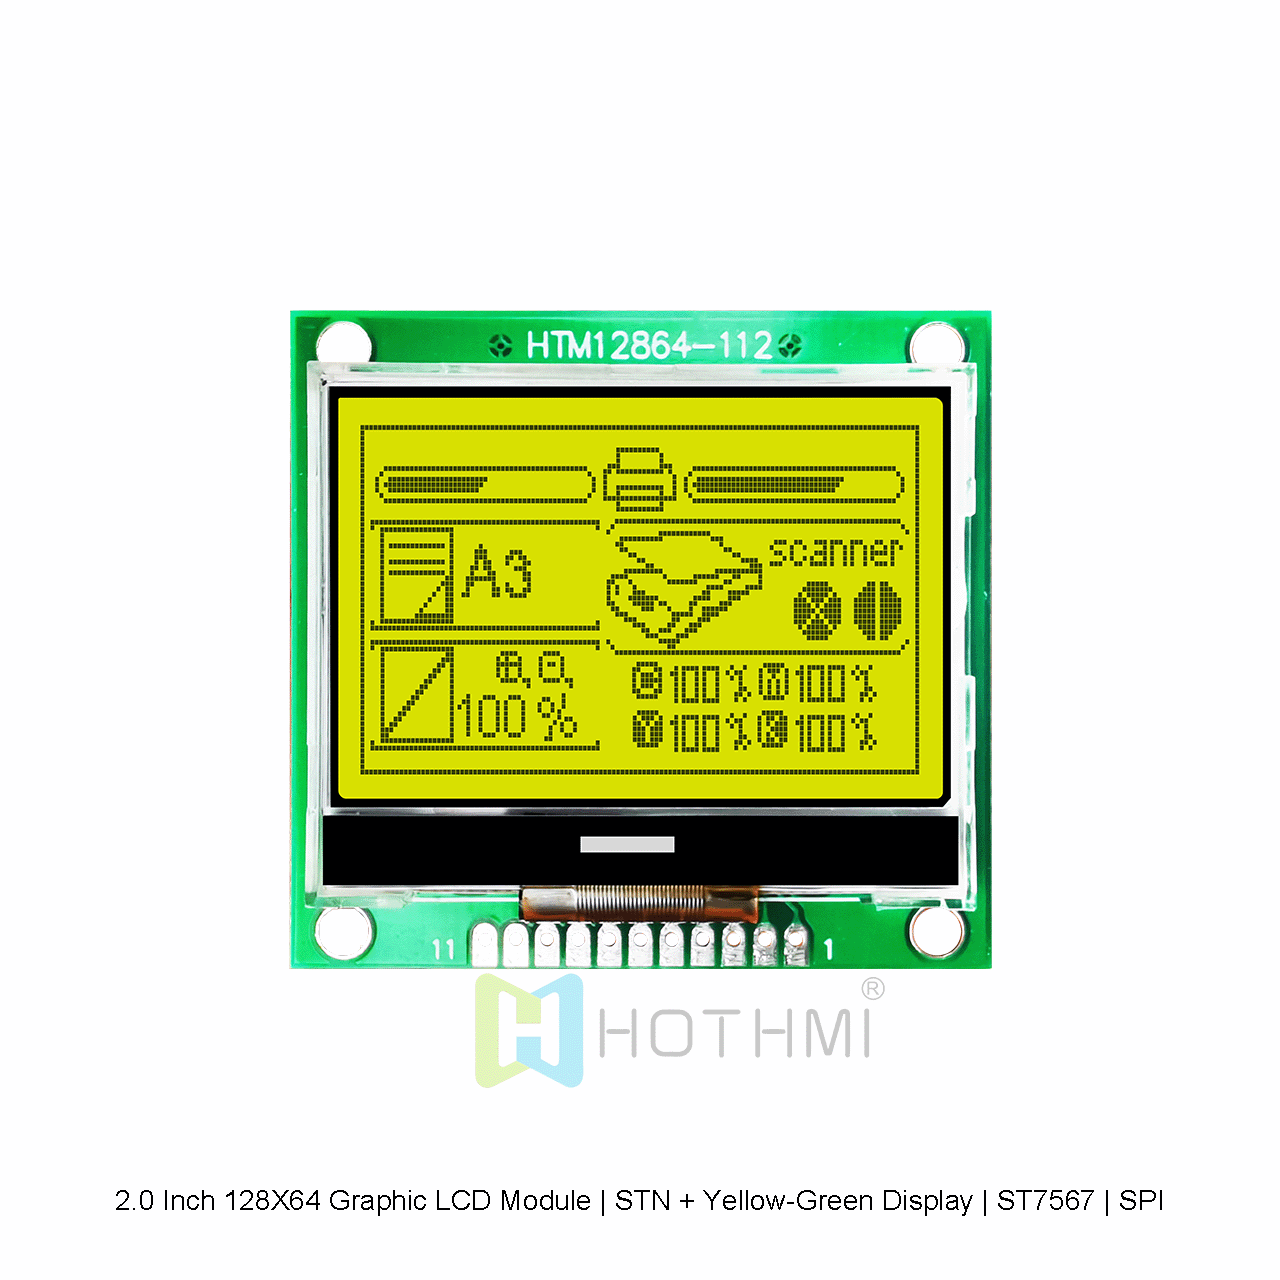 2.0 Inch 128X64 Graphic LCD Module | STN + Yellow-Green Display | ST7567 | SPI